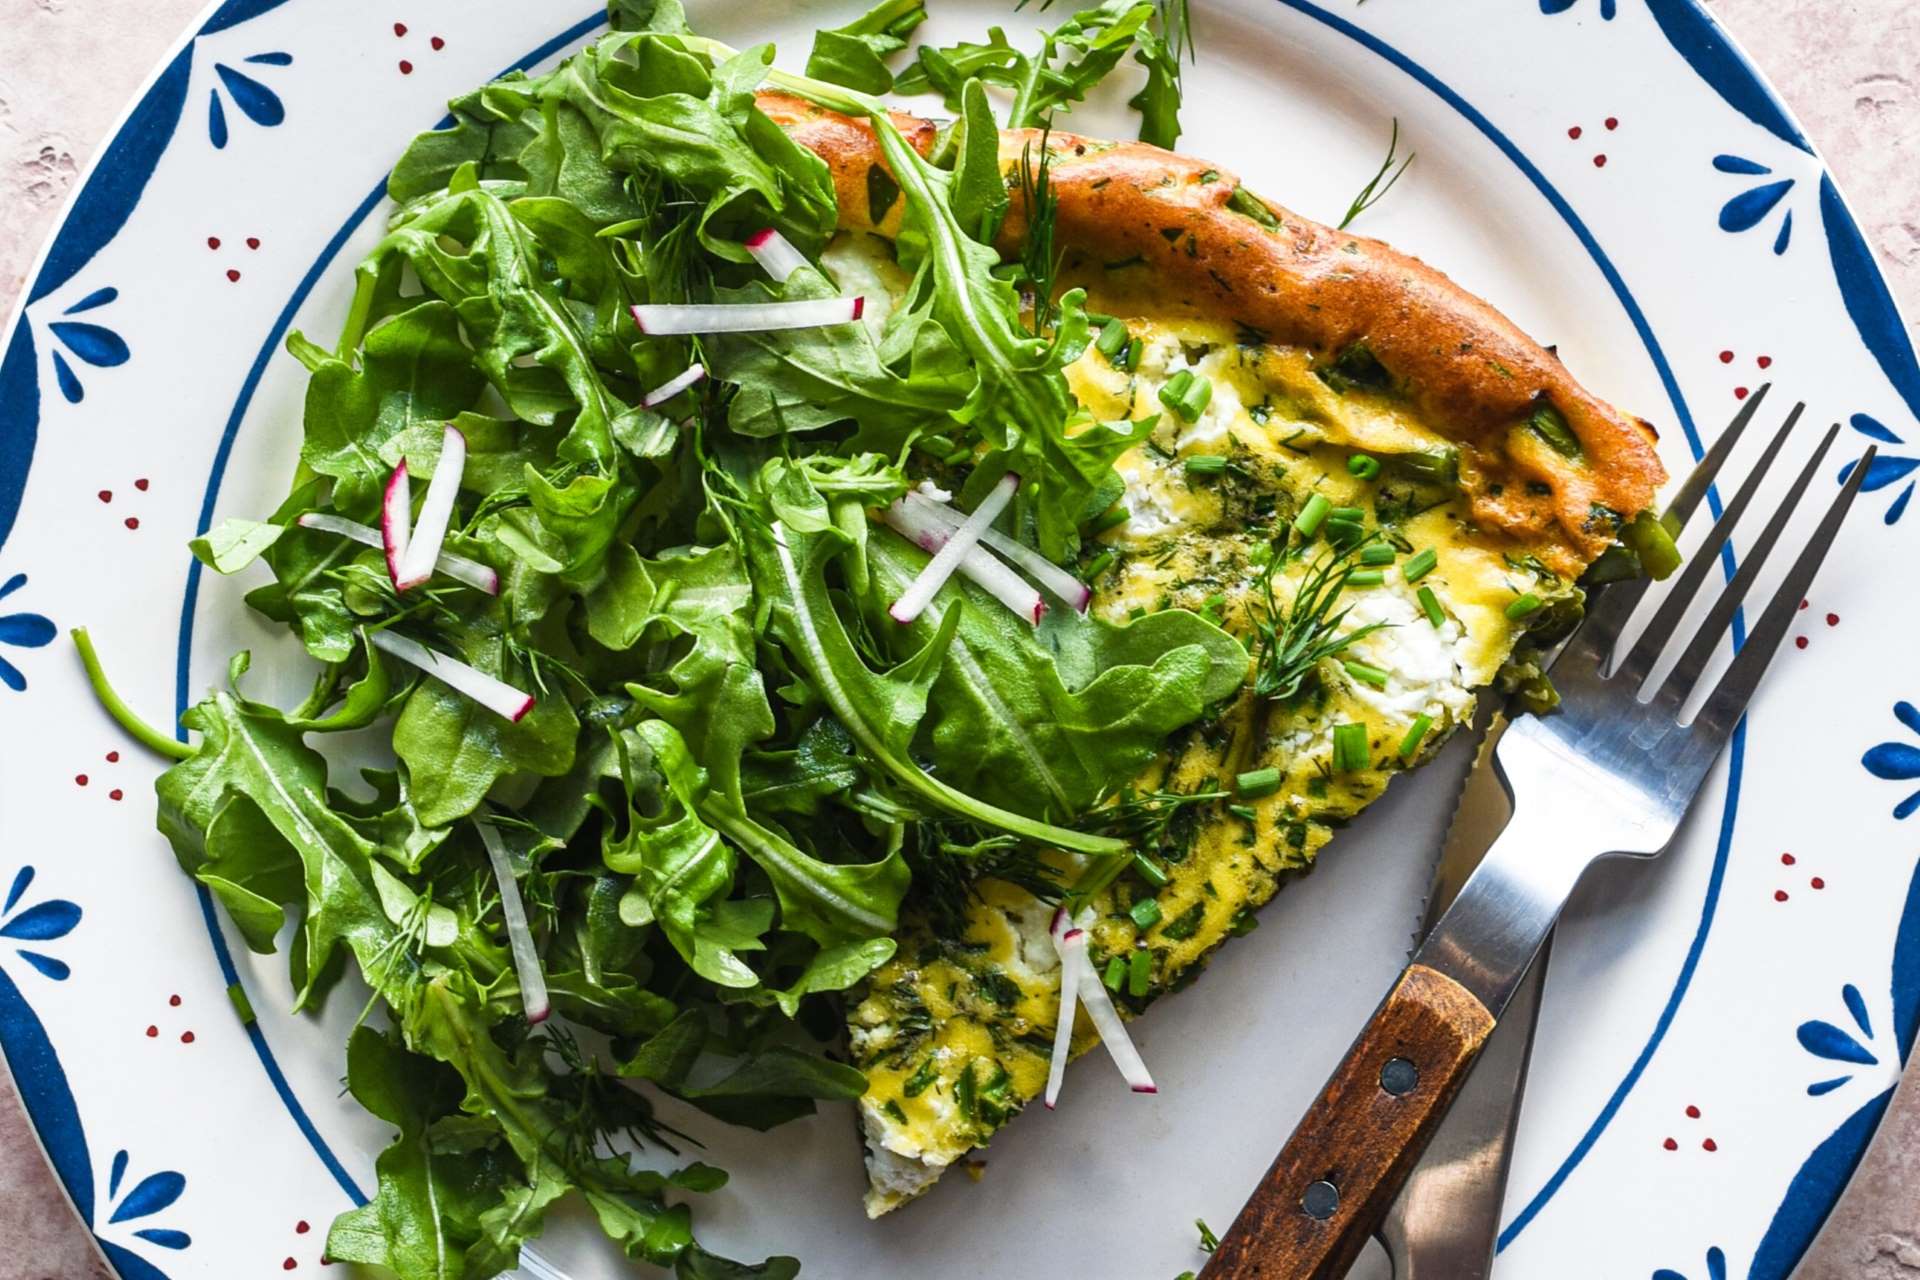 11 Brunch Recipes We’re Making This Weekend